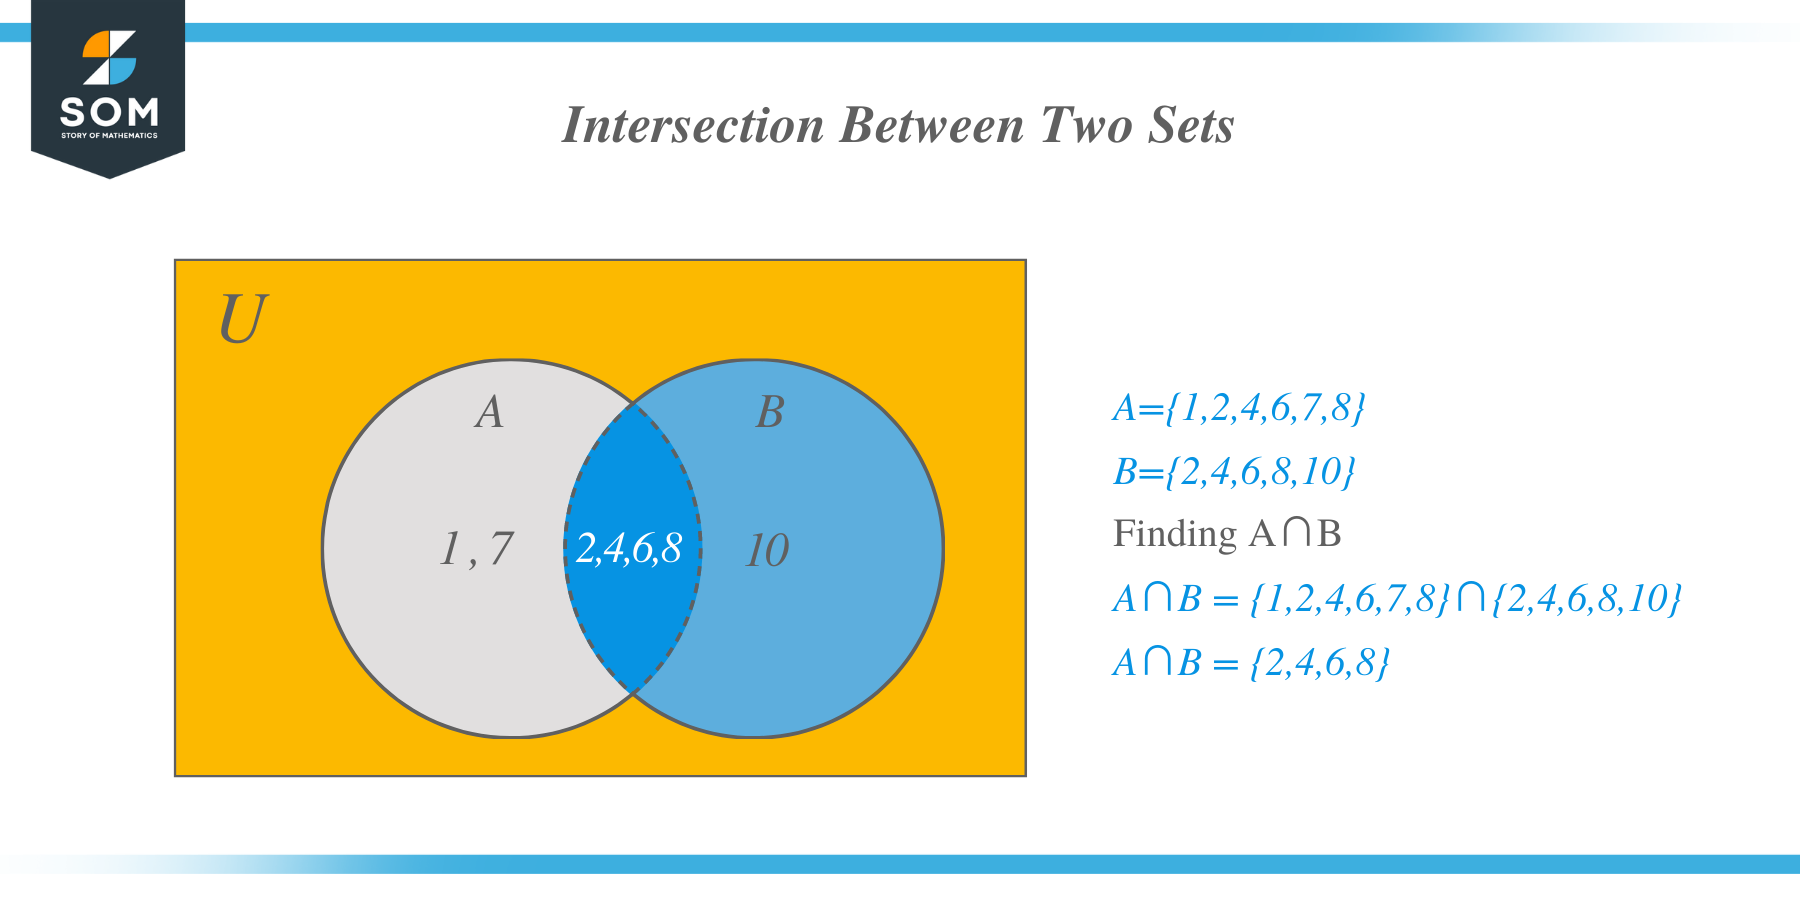 Intersection between two sets